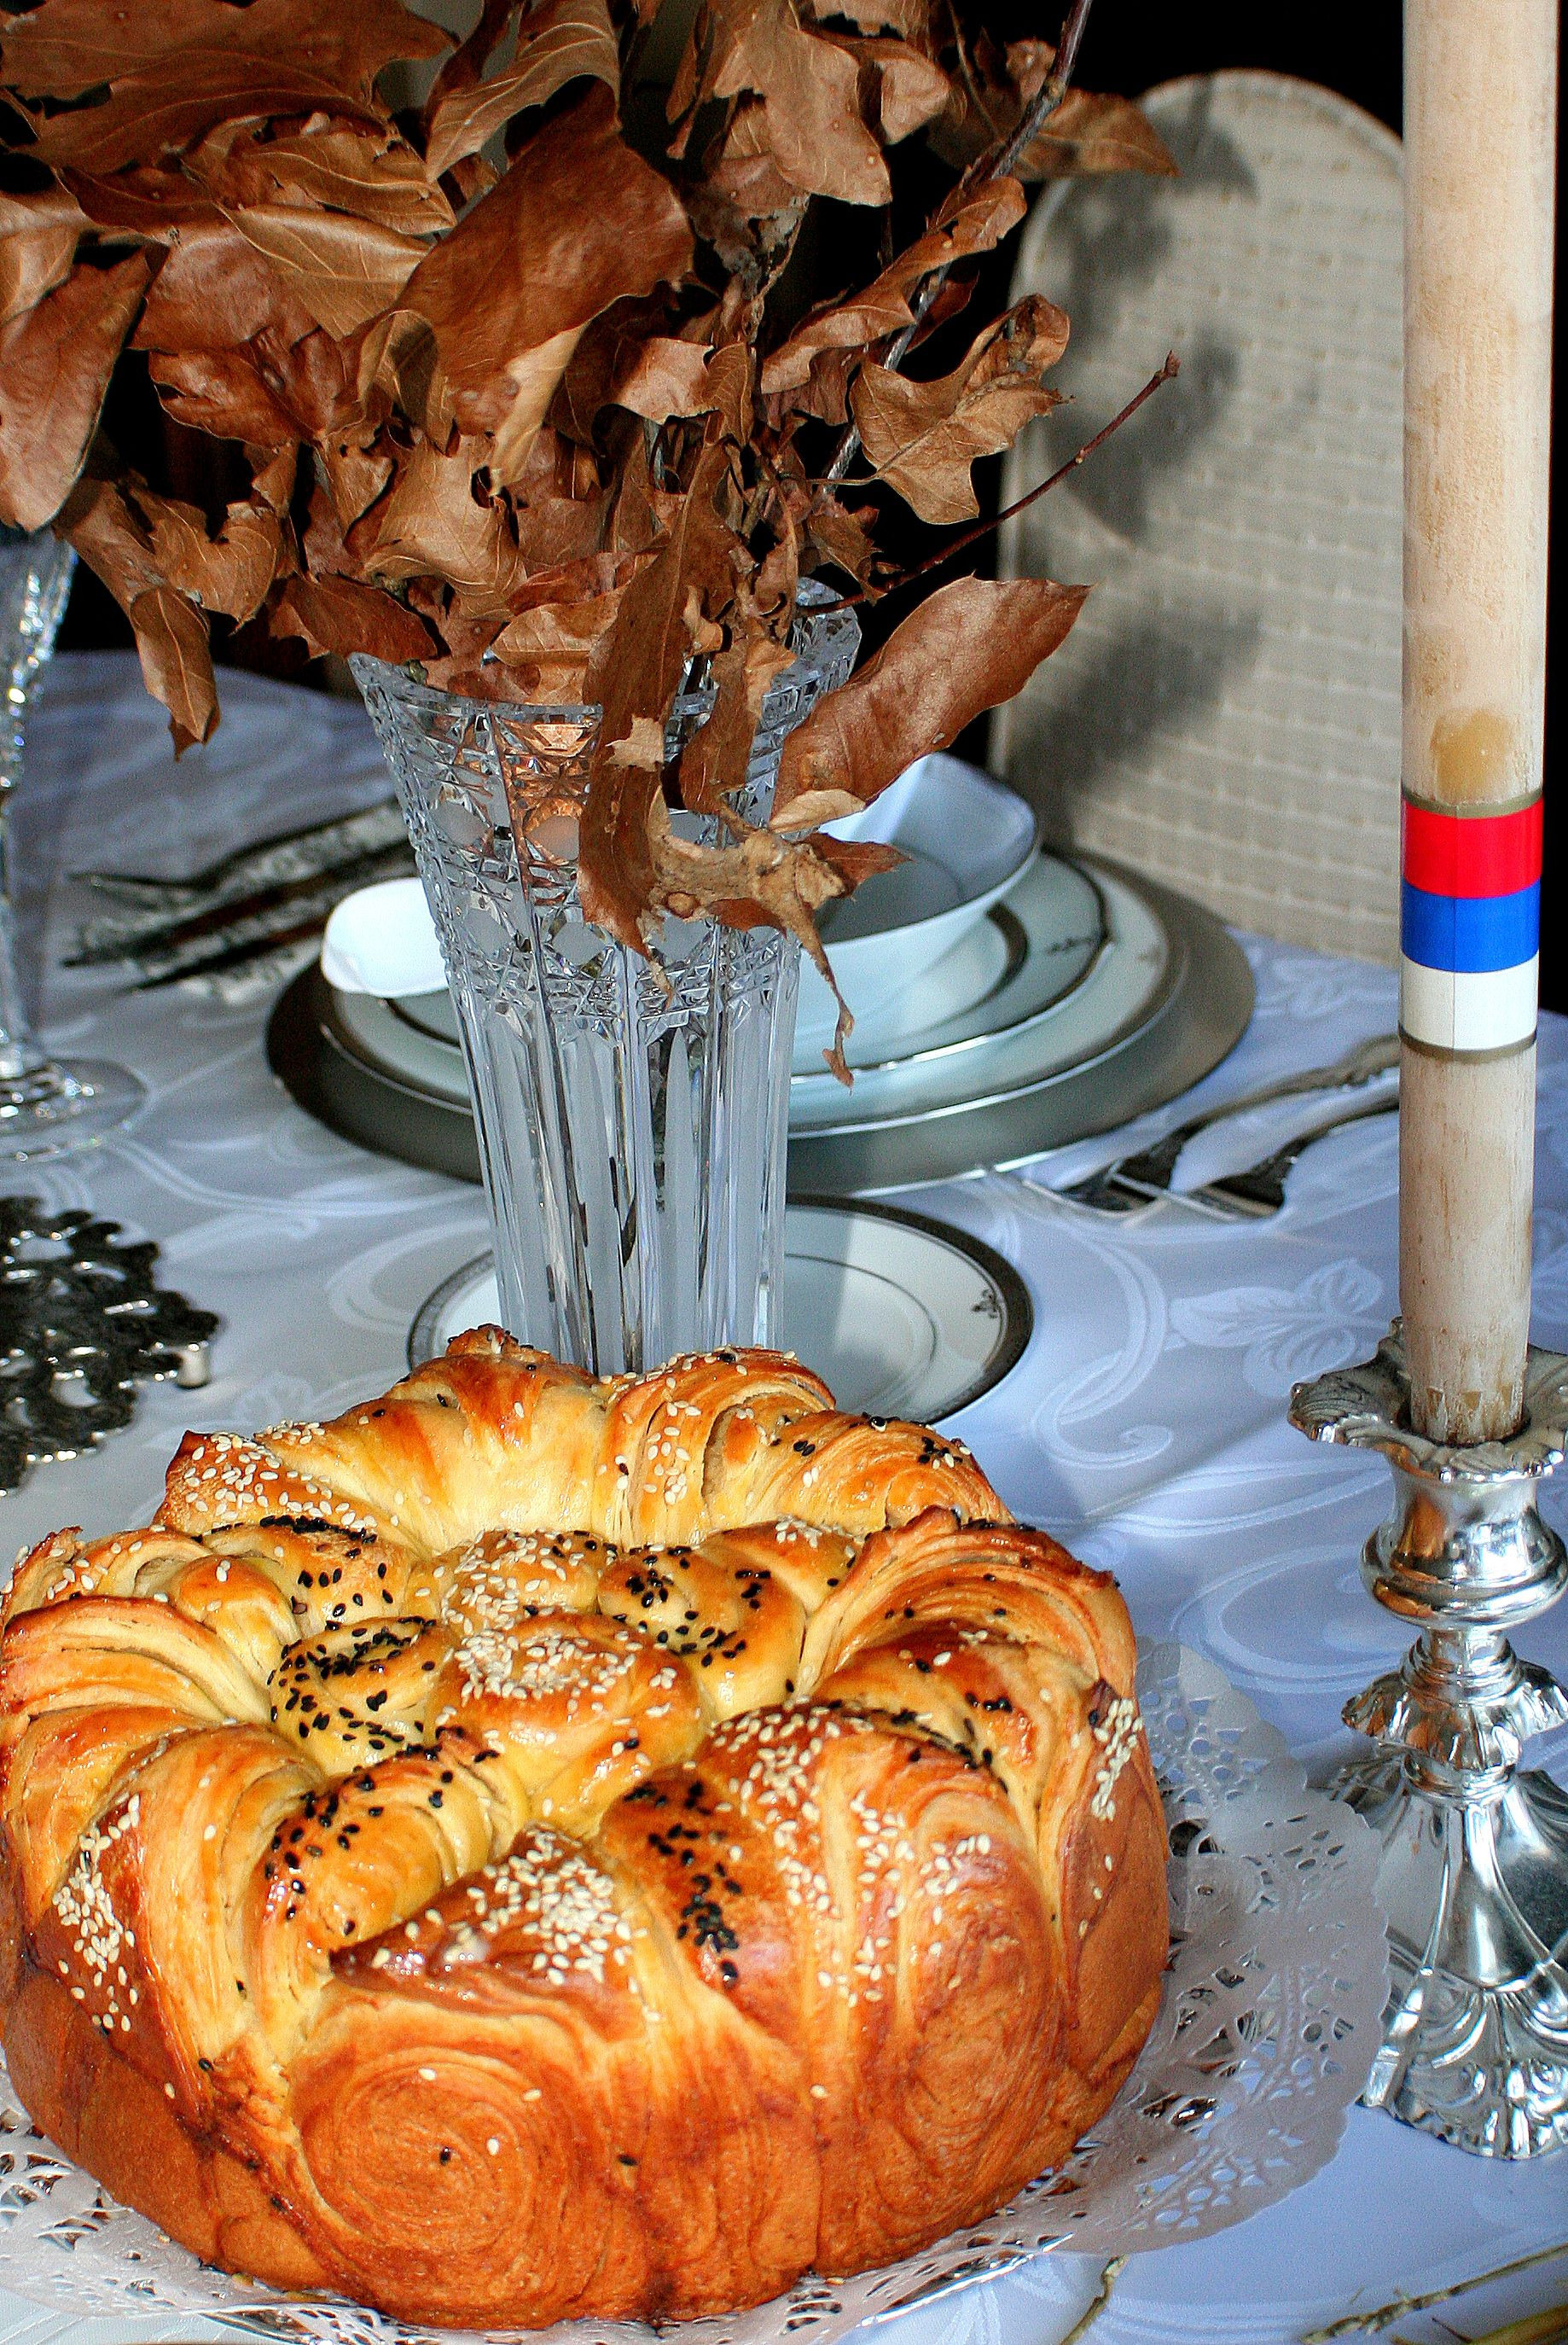 Serbian Christmas Bread
 A česnica is the ceremonial round loaf of bread that is